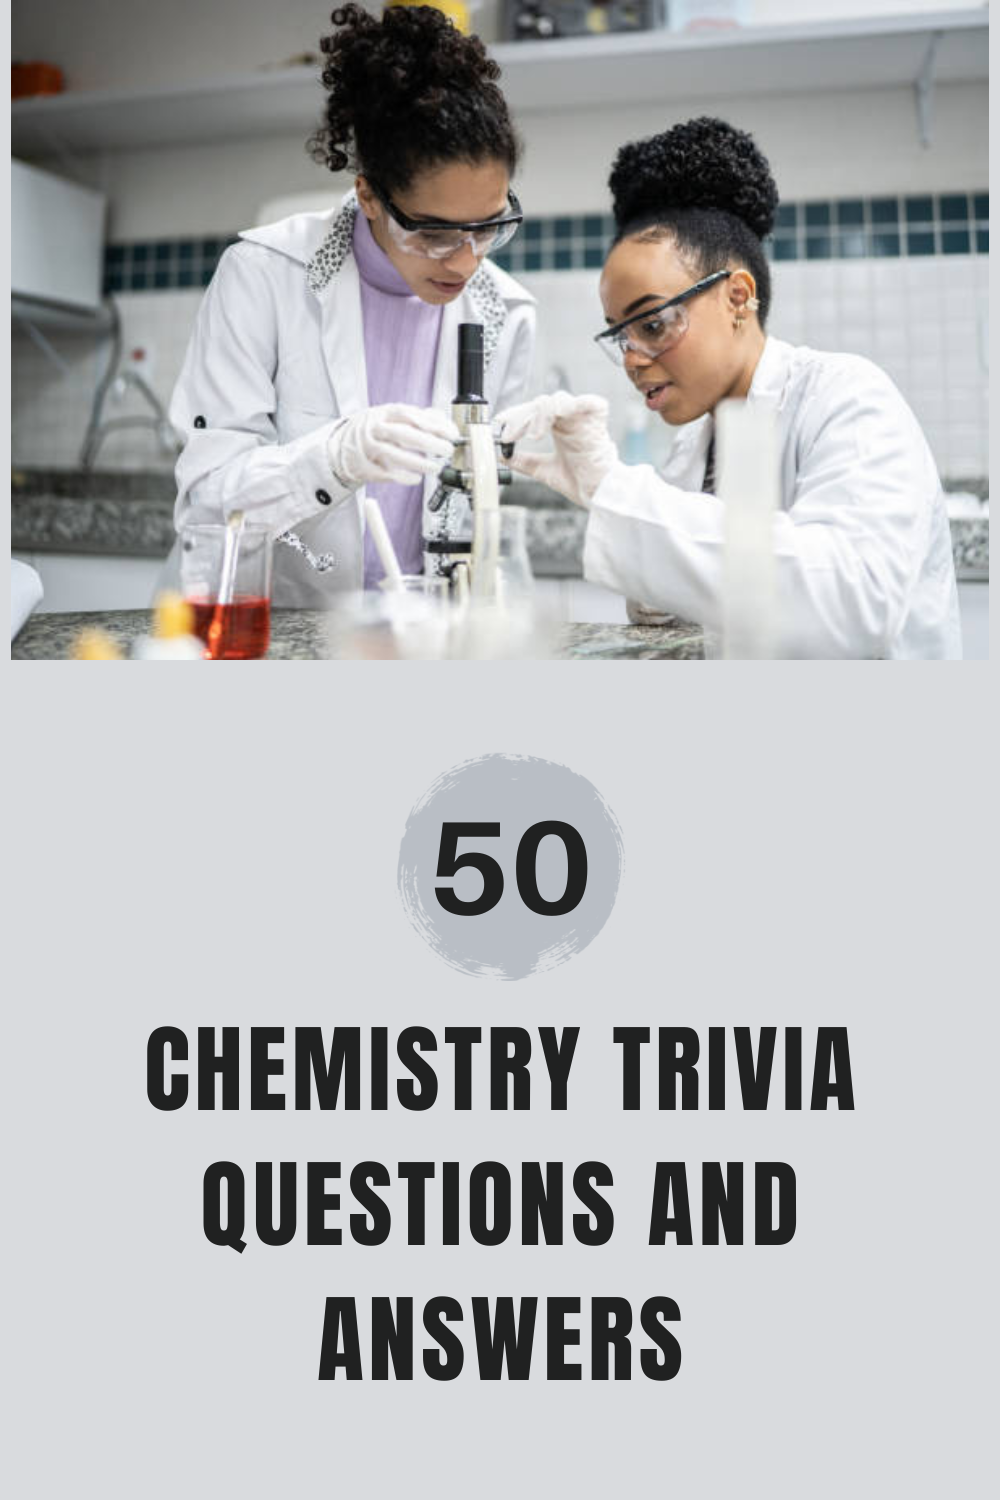 50 Chemistry Trivia Questions and Answers